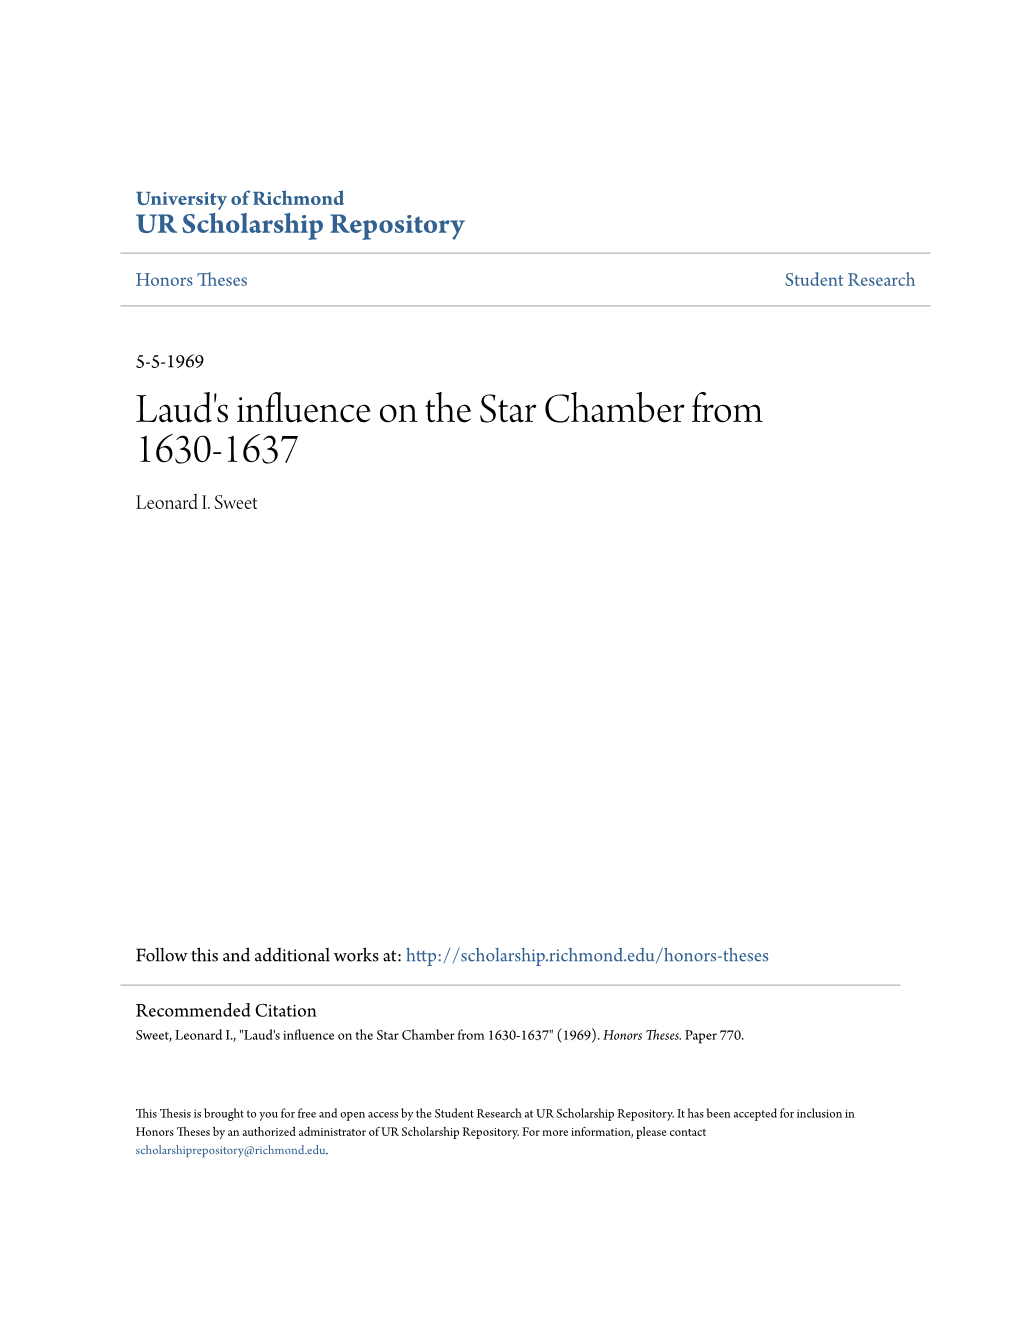 Laud's Influence on the Star Chamber from 1630-1637 Leonard I